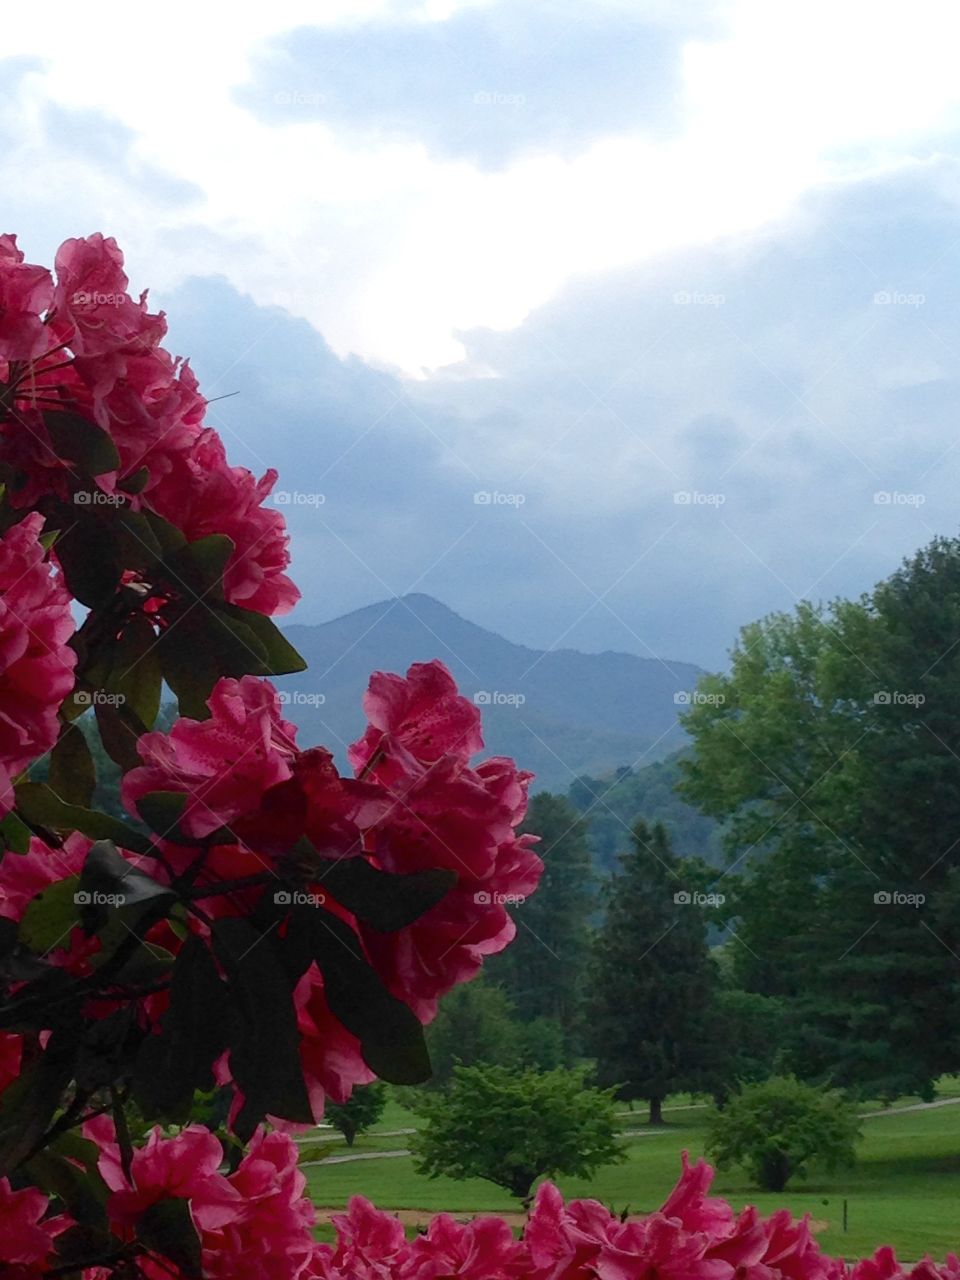 Rhododendron in the Smokies . Rhododendron in full bloom